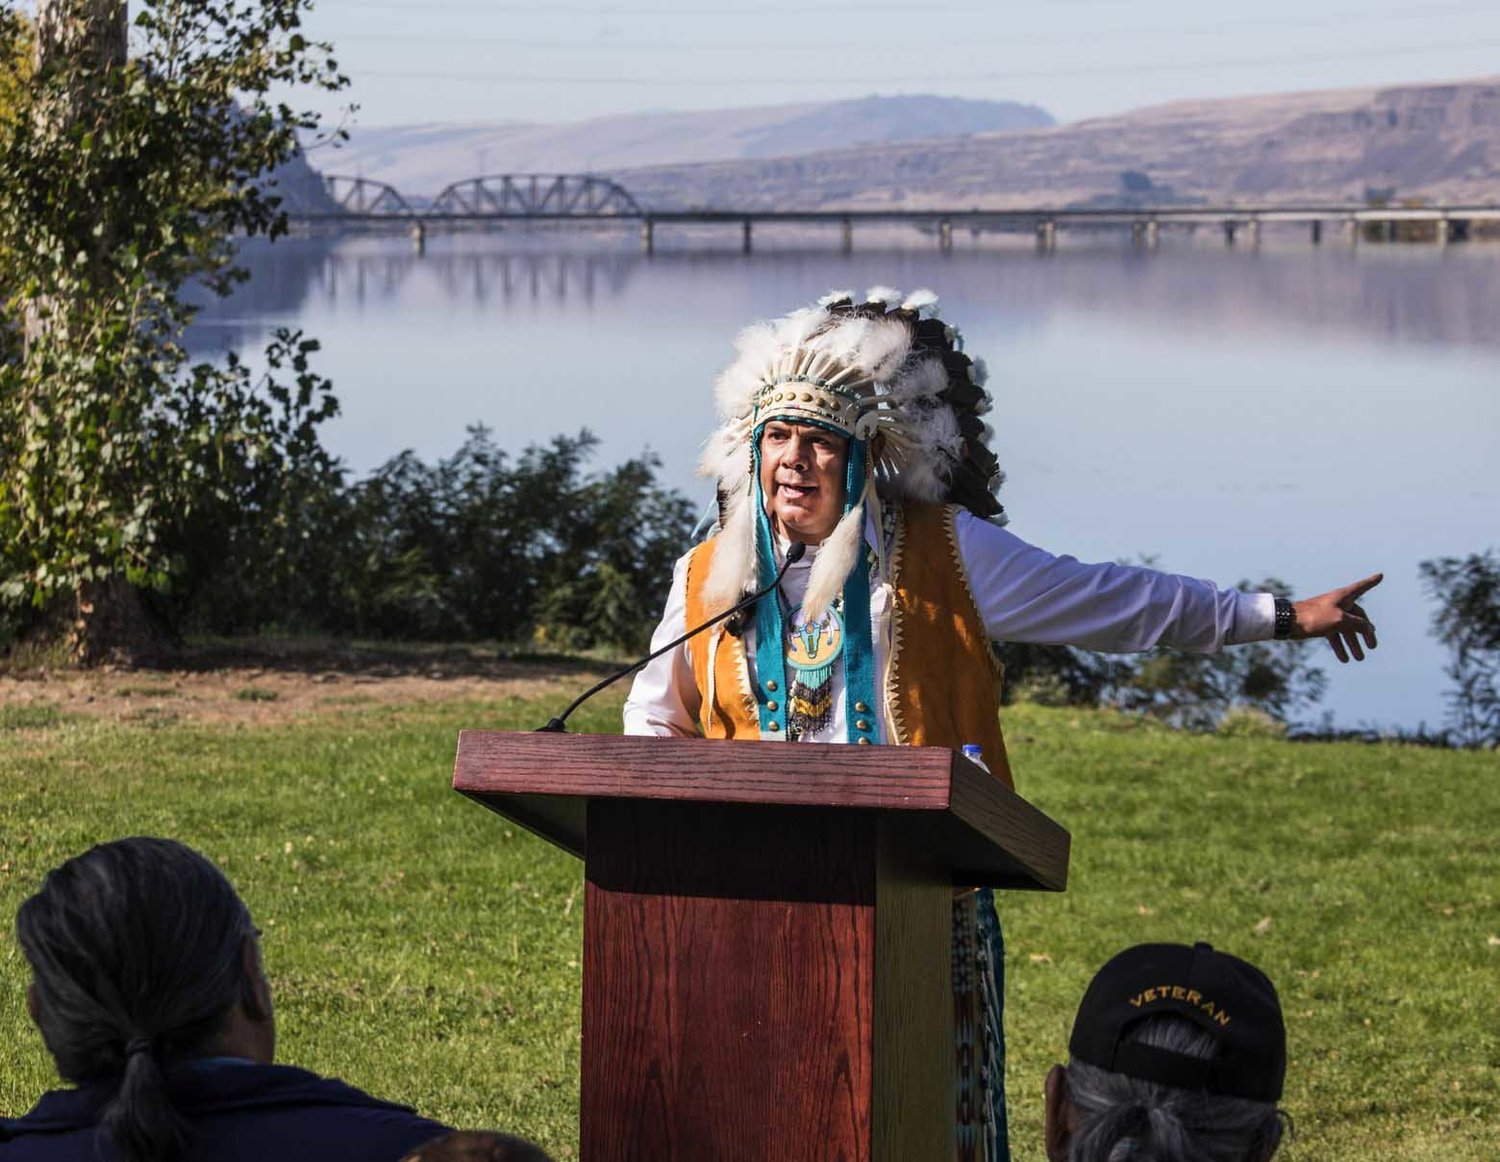 JoDe Goudy, chairman of the Yakama Nation, calls on Monday for the removal of three dams on the lower Columbia River. 'Dams or salmon,' he said in an emotional plea at the Celilo Village park near The Dalles Dam.